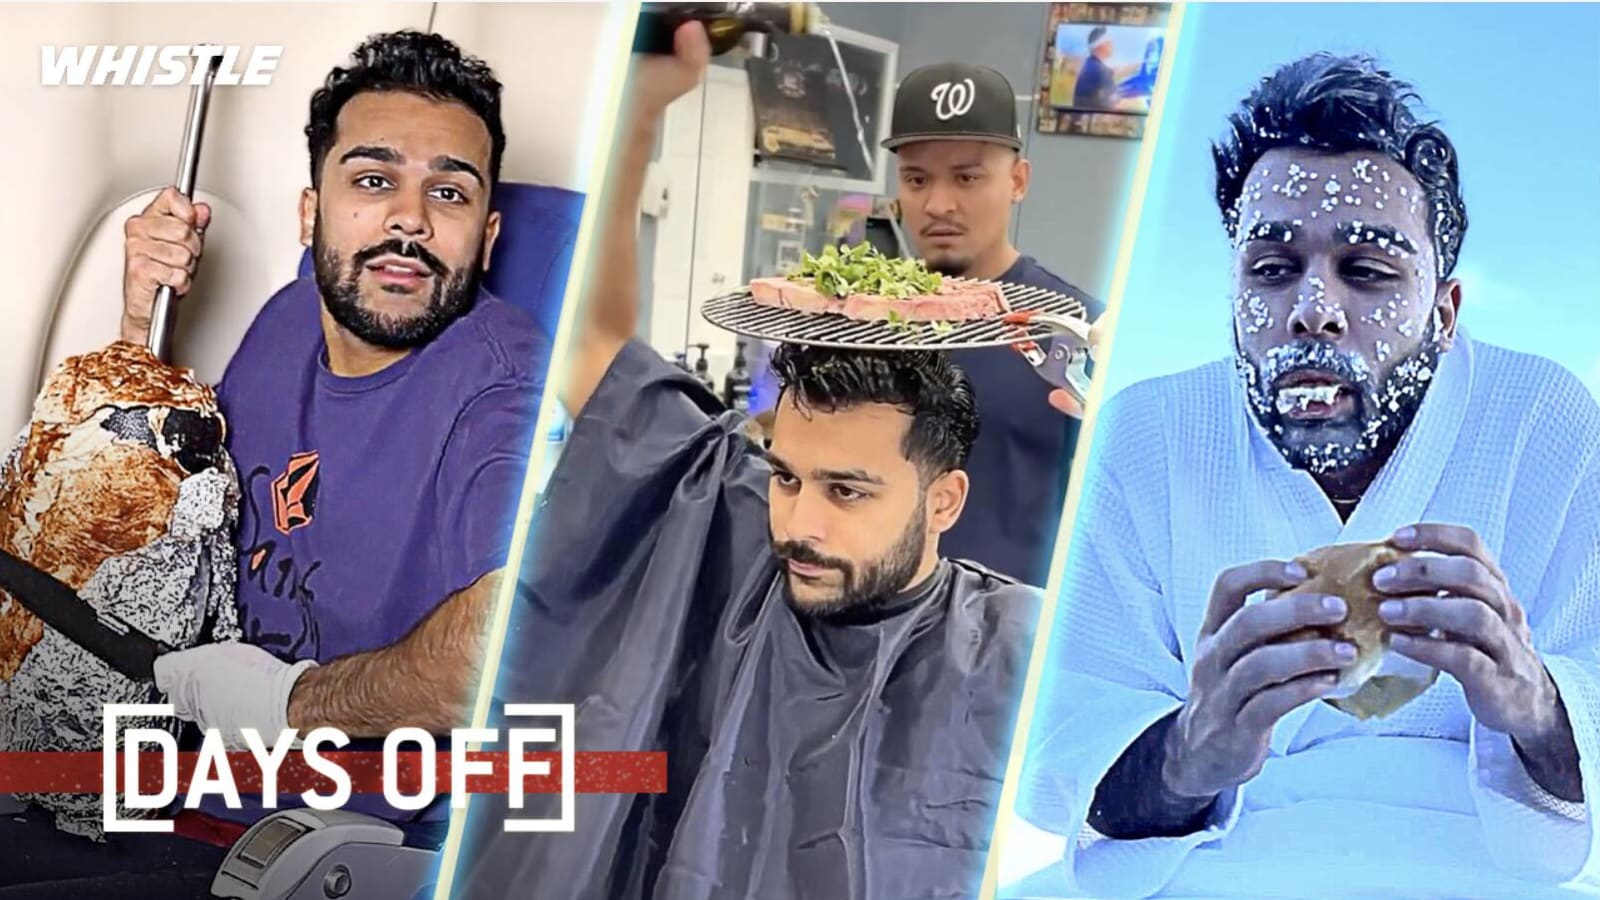 Watch: TikTok comedian Adam Waheed explains how he went viral in latest "Days Off" episode.